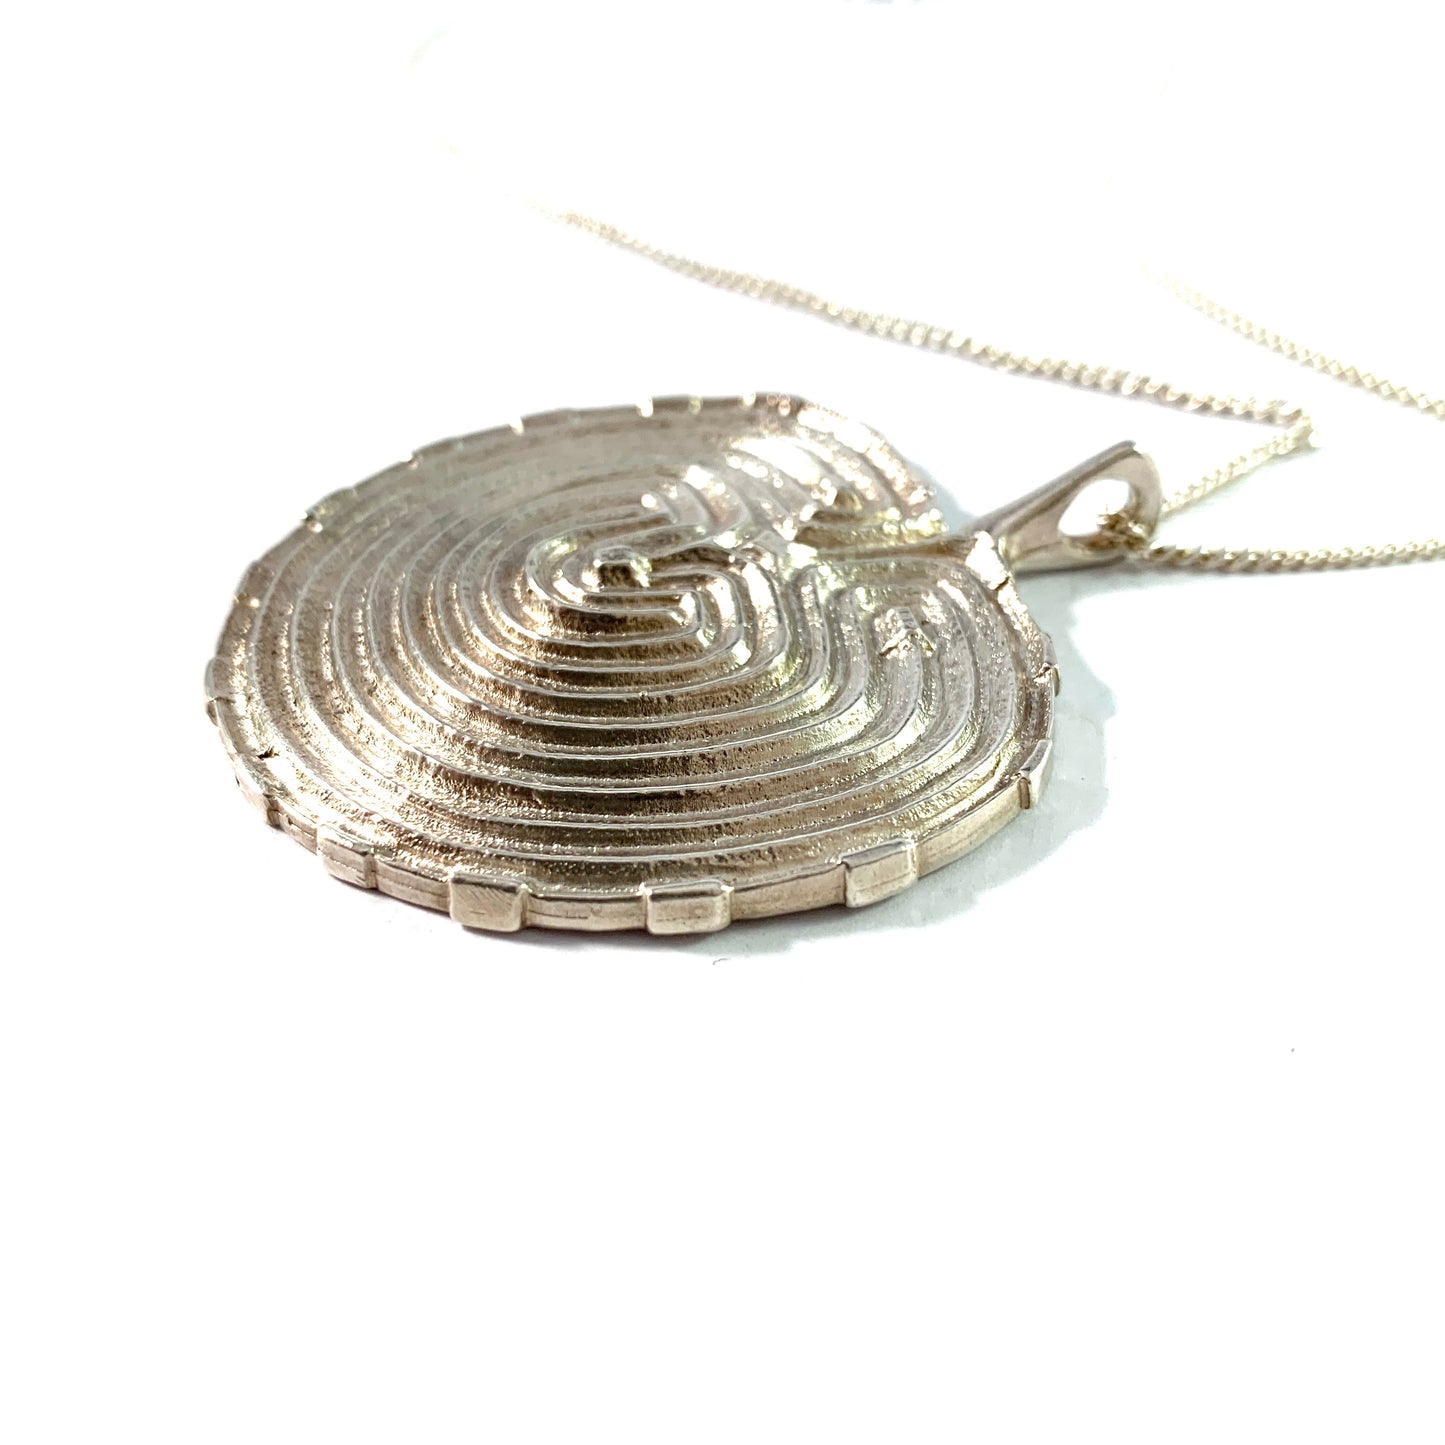 Ibe Dahlqust, Sweden 1970s. Massive Solid Silver Troy Town Gotland Unisex Pendant Necklace.